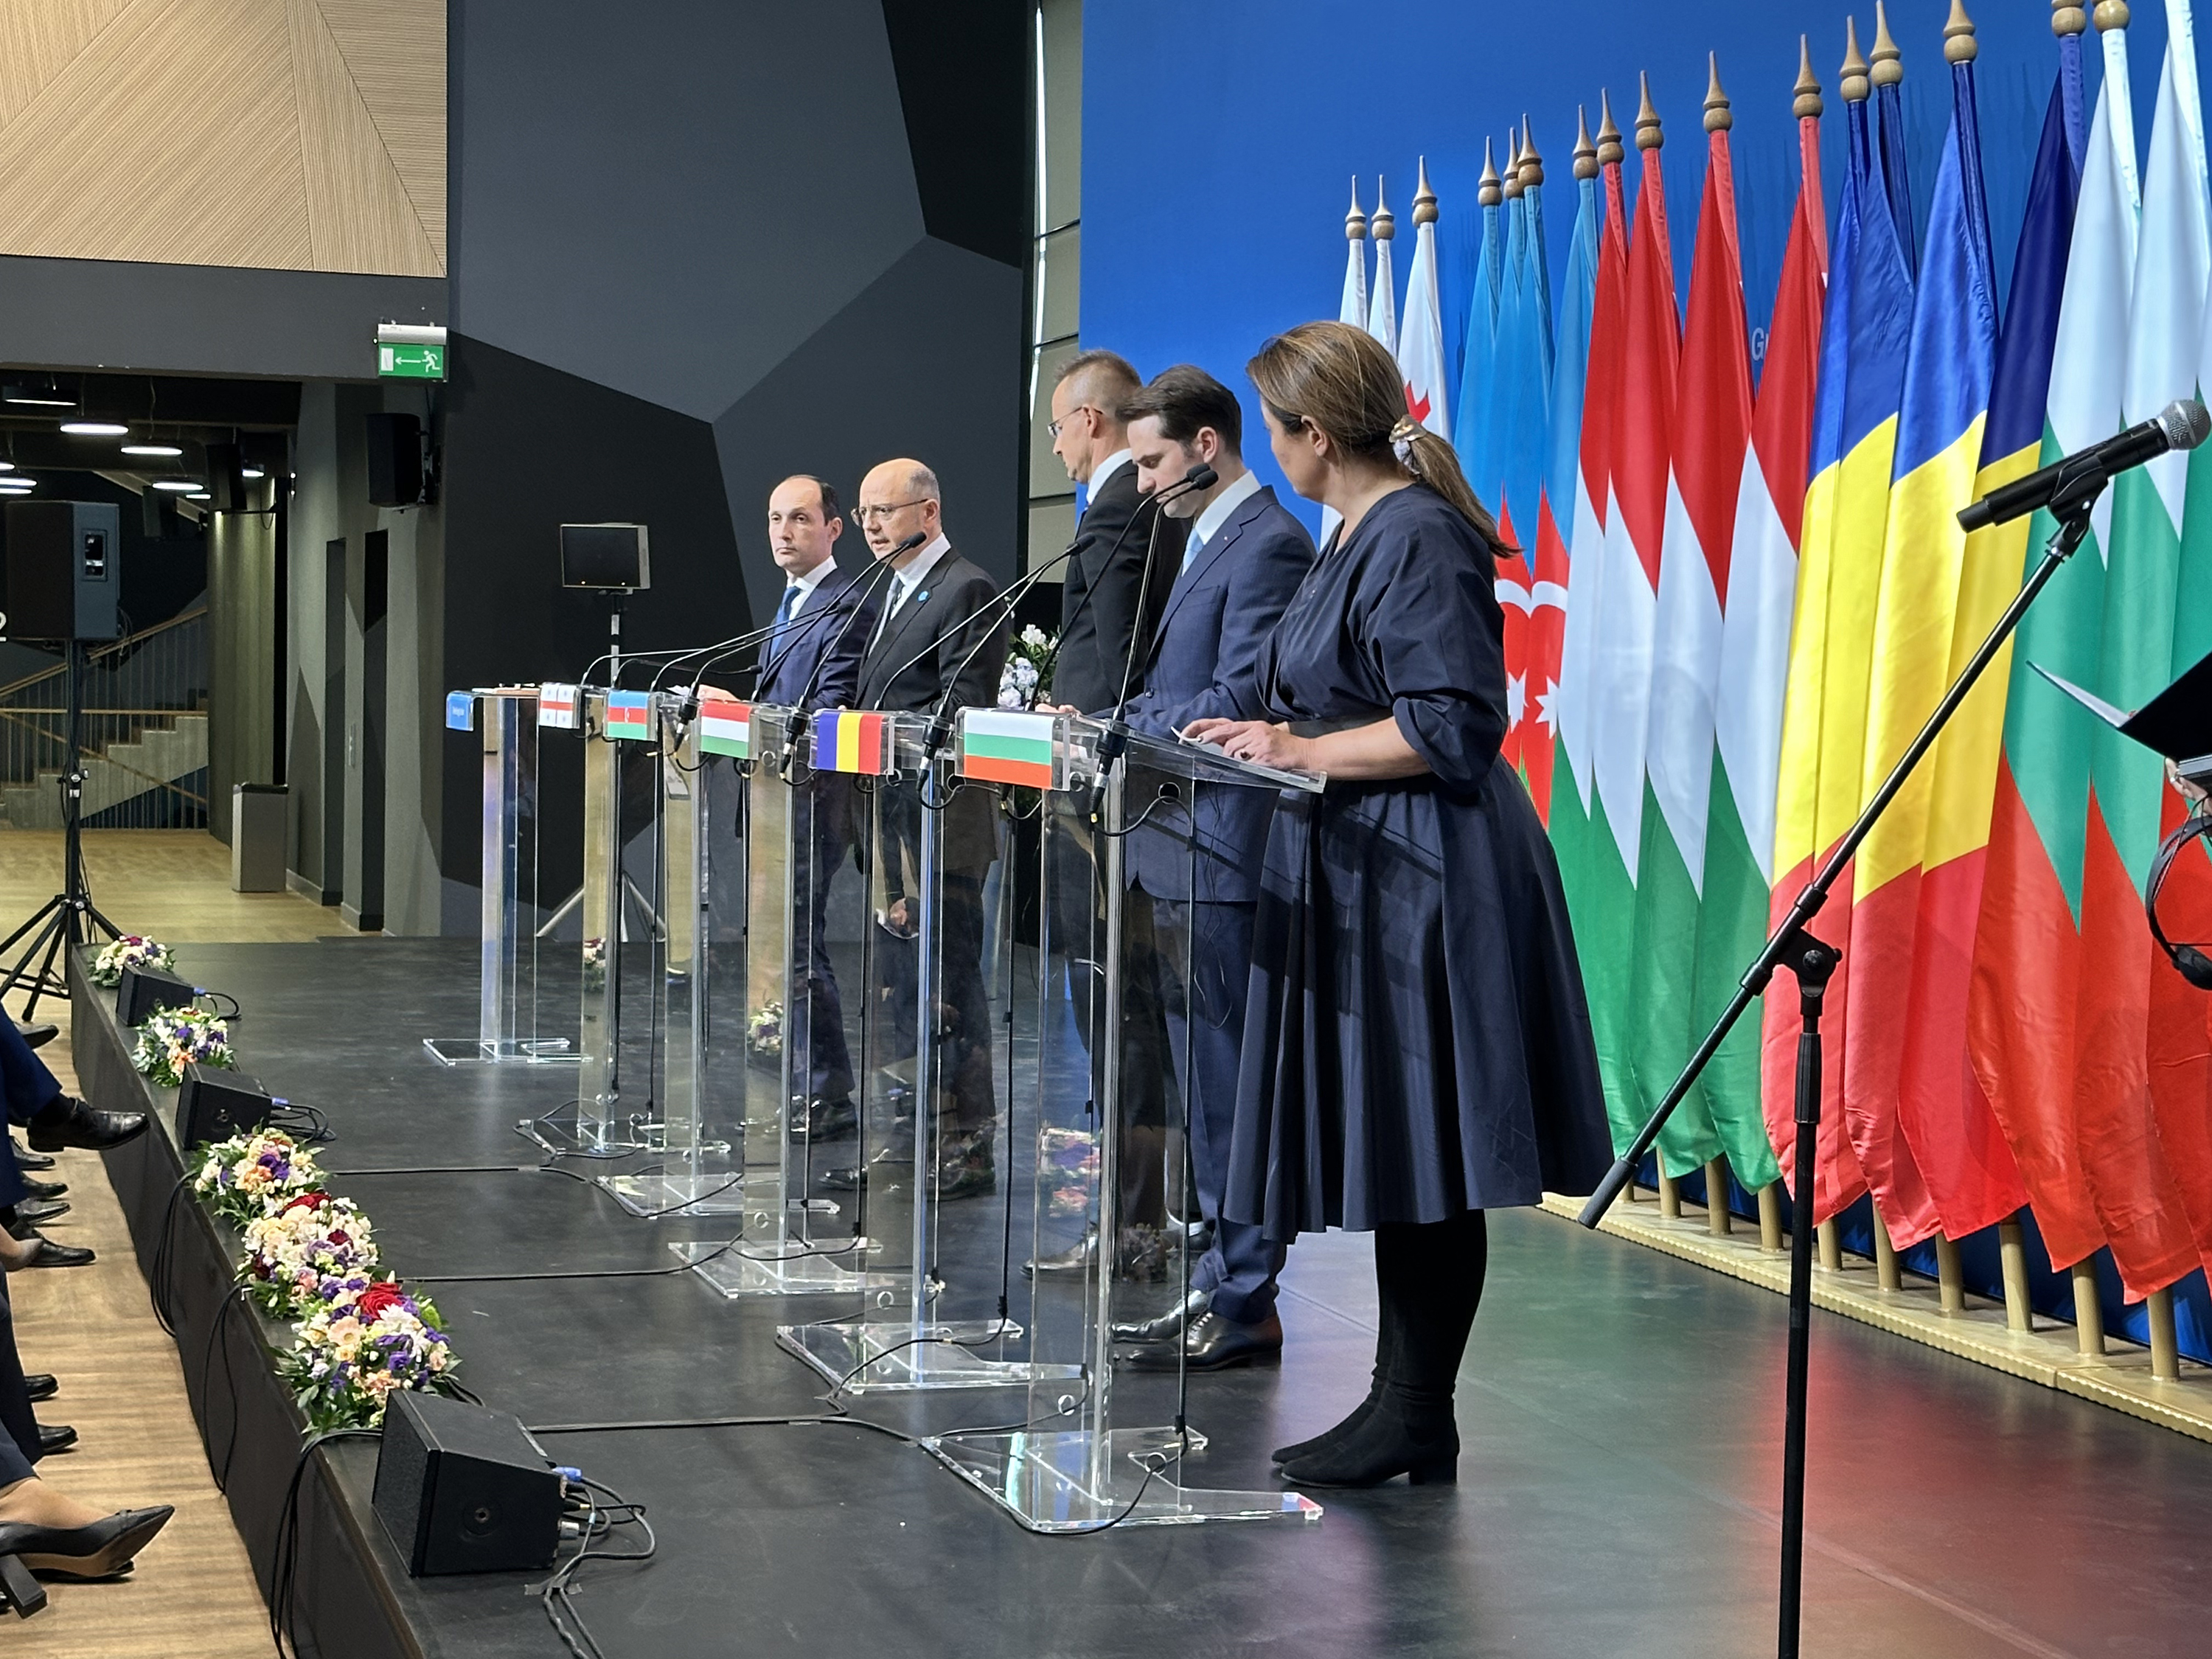 The fifth Ministerial Meeting on the green energy development and transmission project was held in Budapest